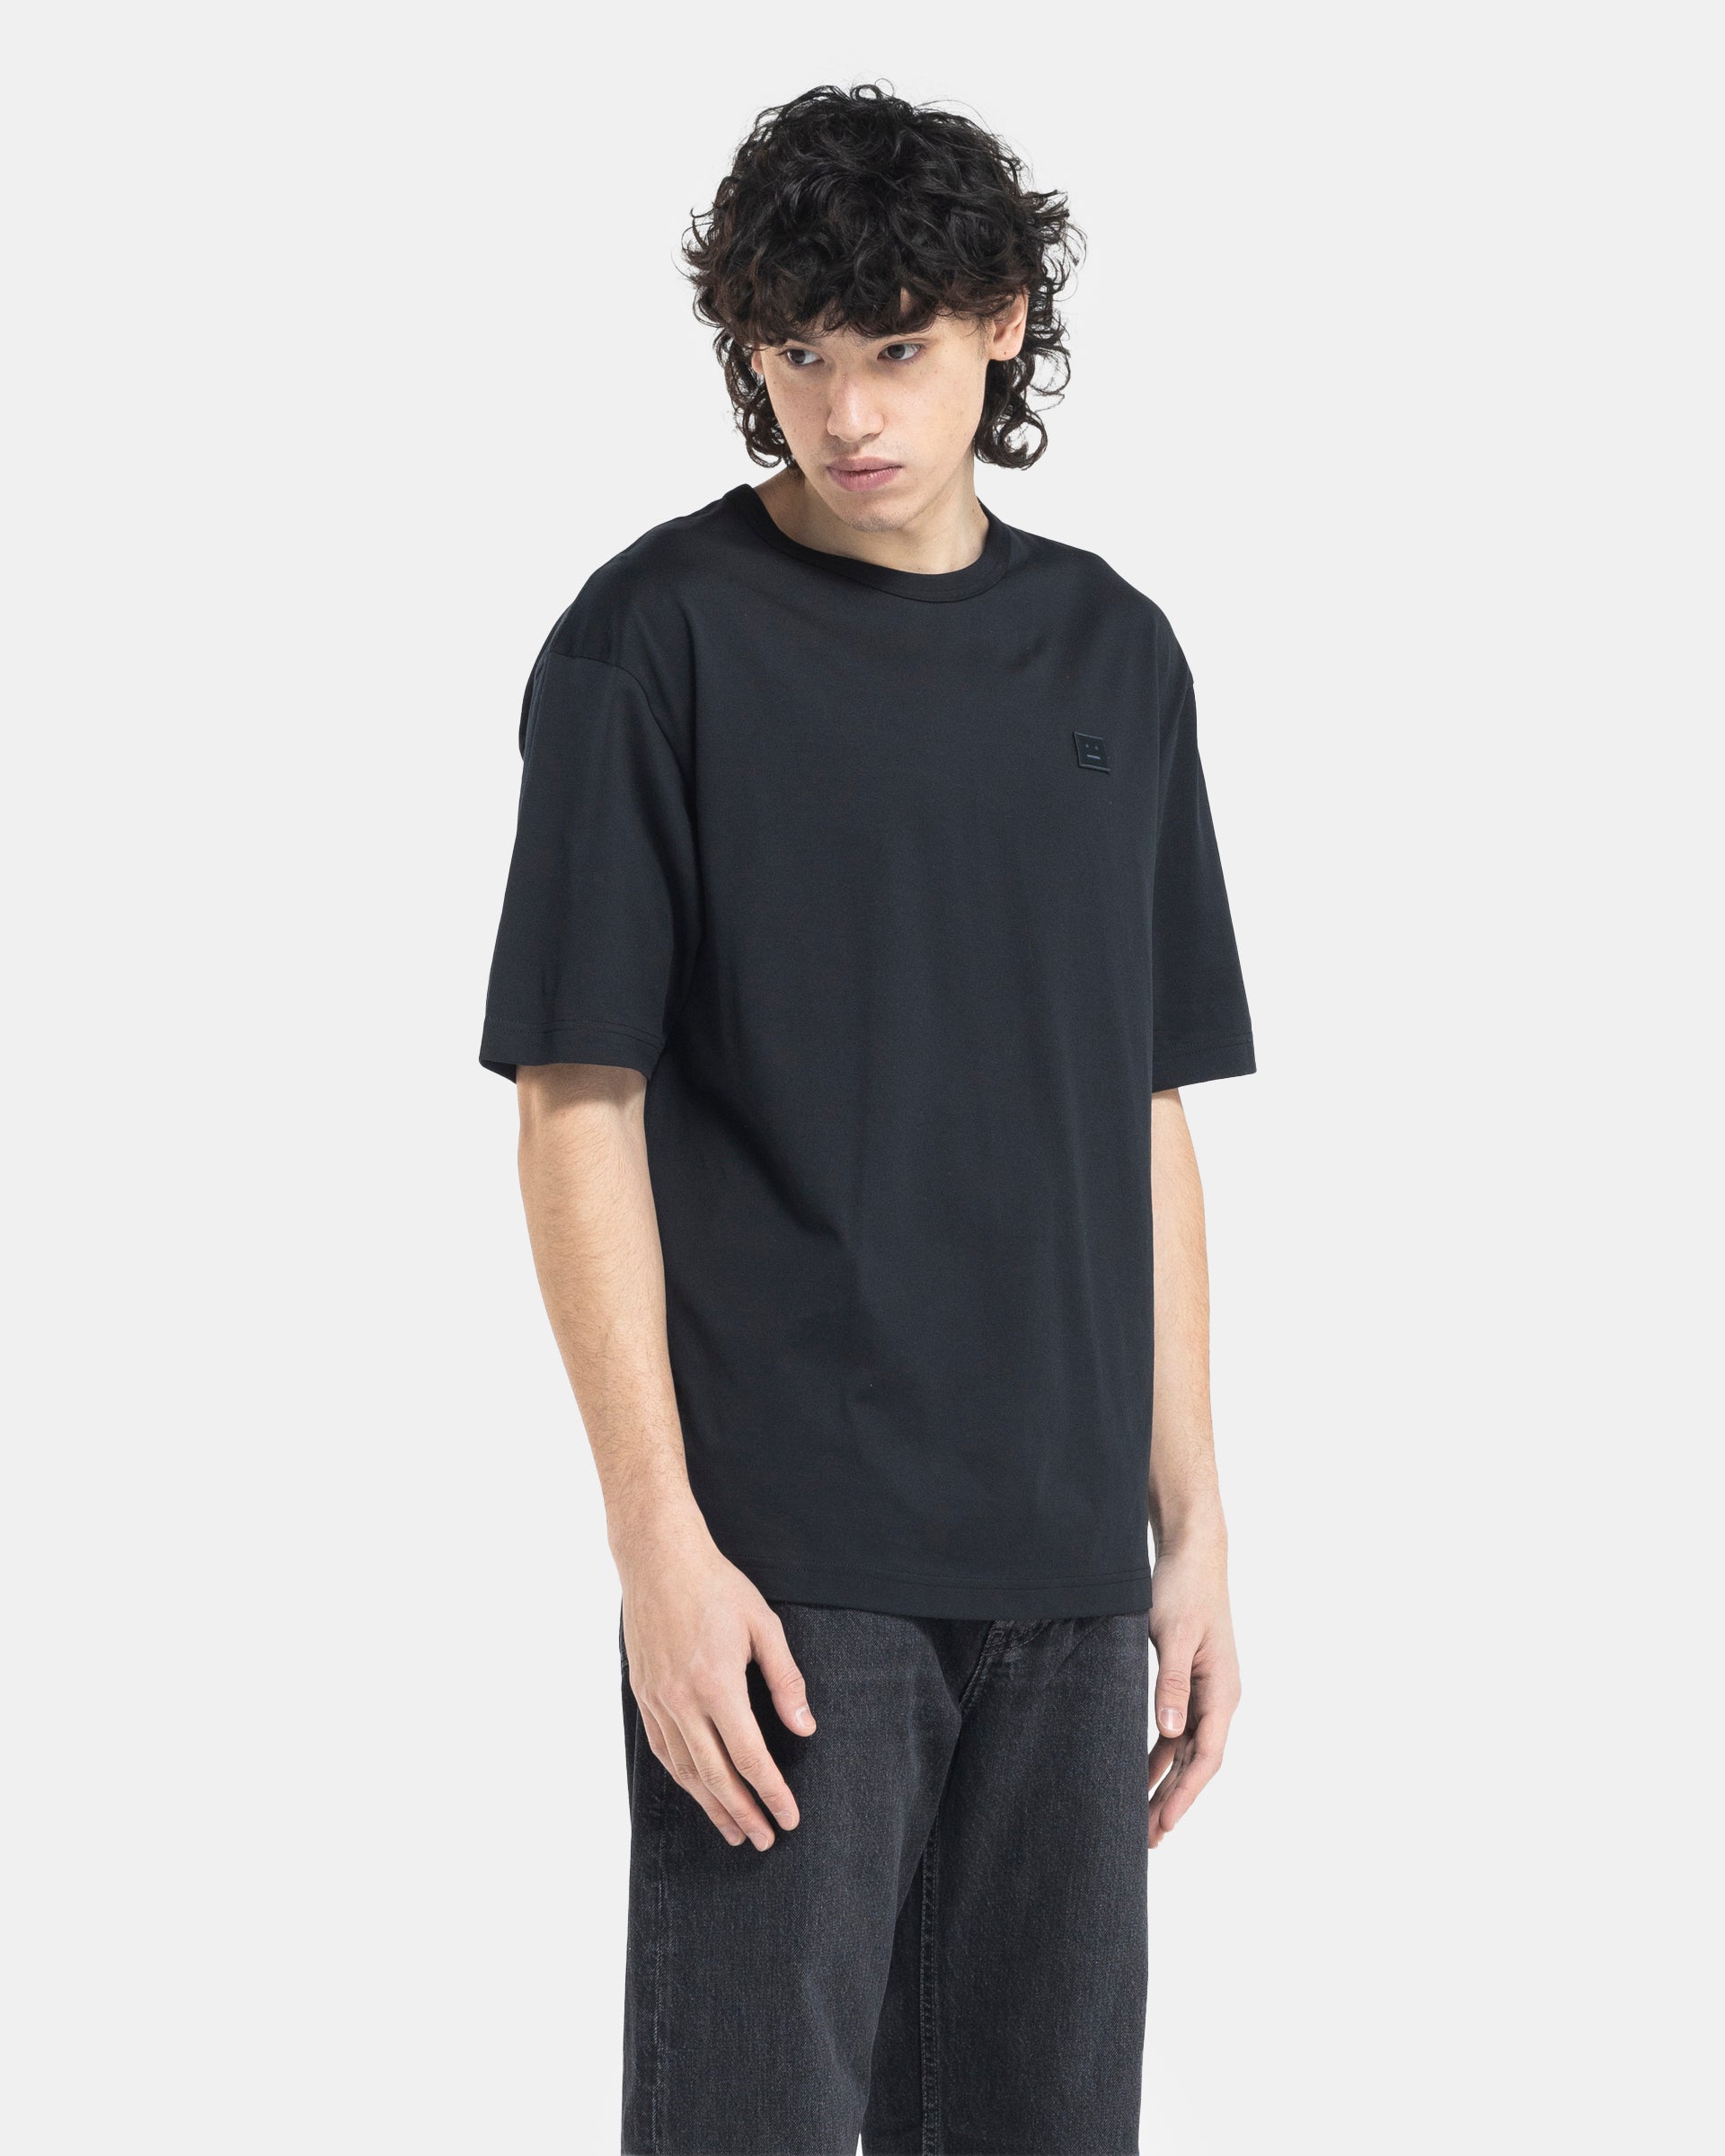 Relaxed Crew Neck T-Shirt in Black